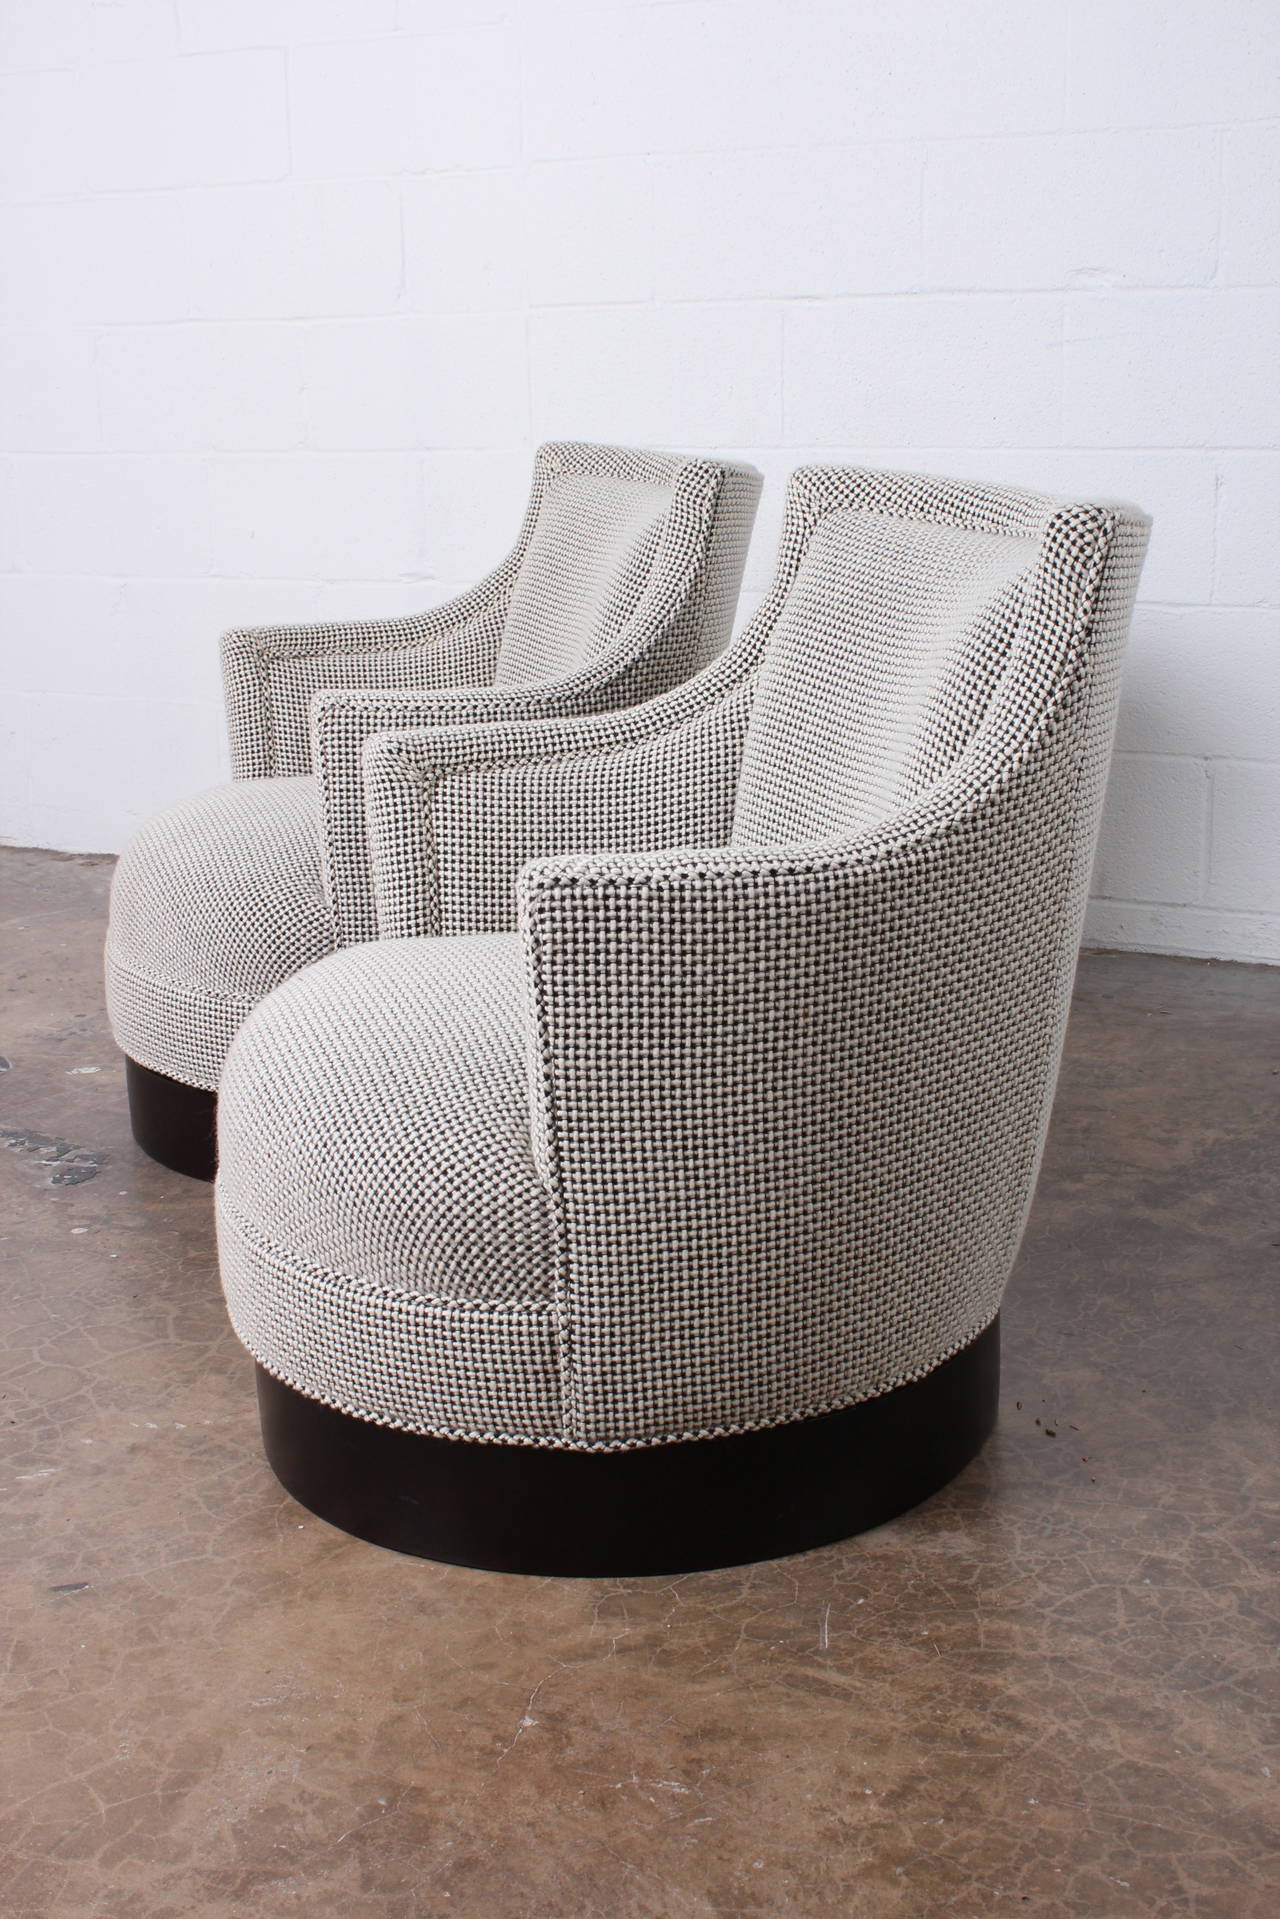 Pair of Swivel Chairs by Edward Wormley for Dunbar 6